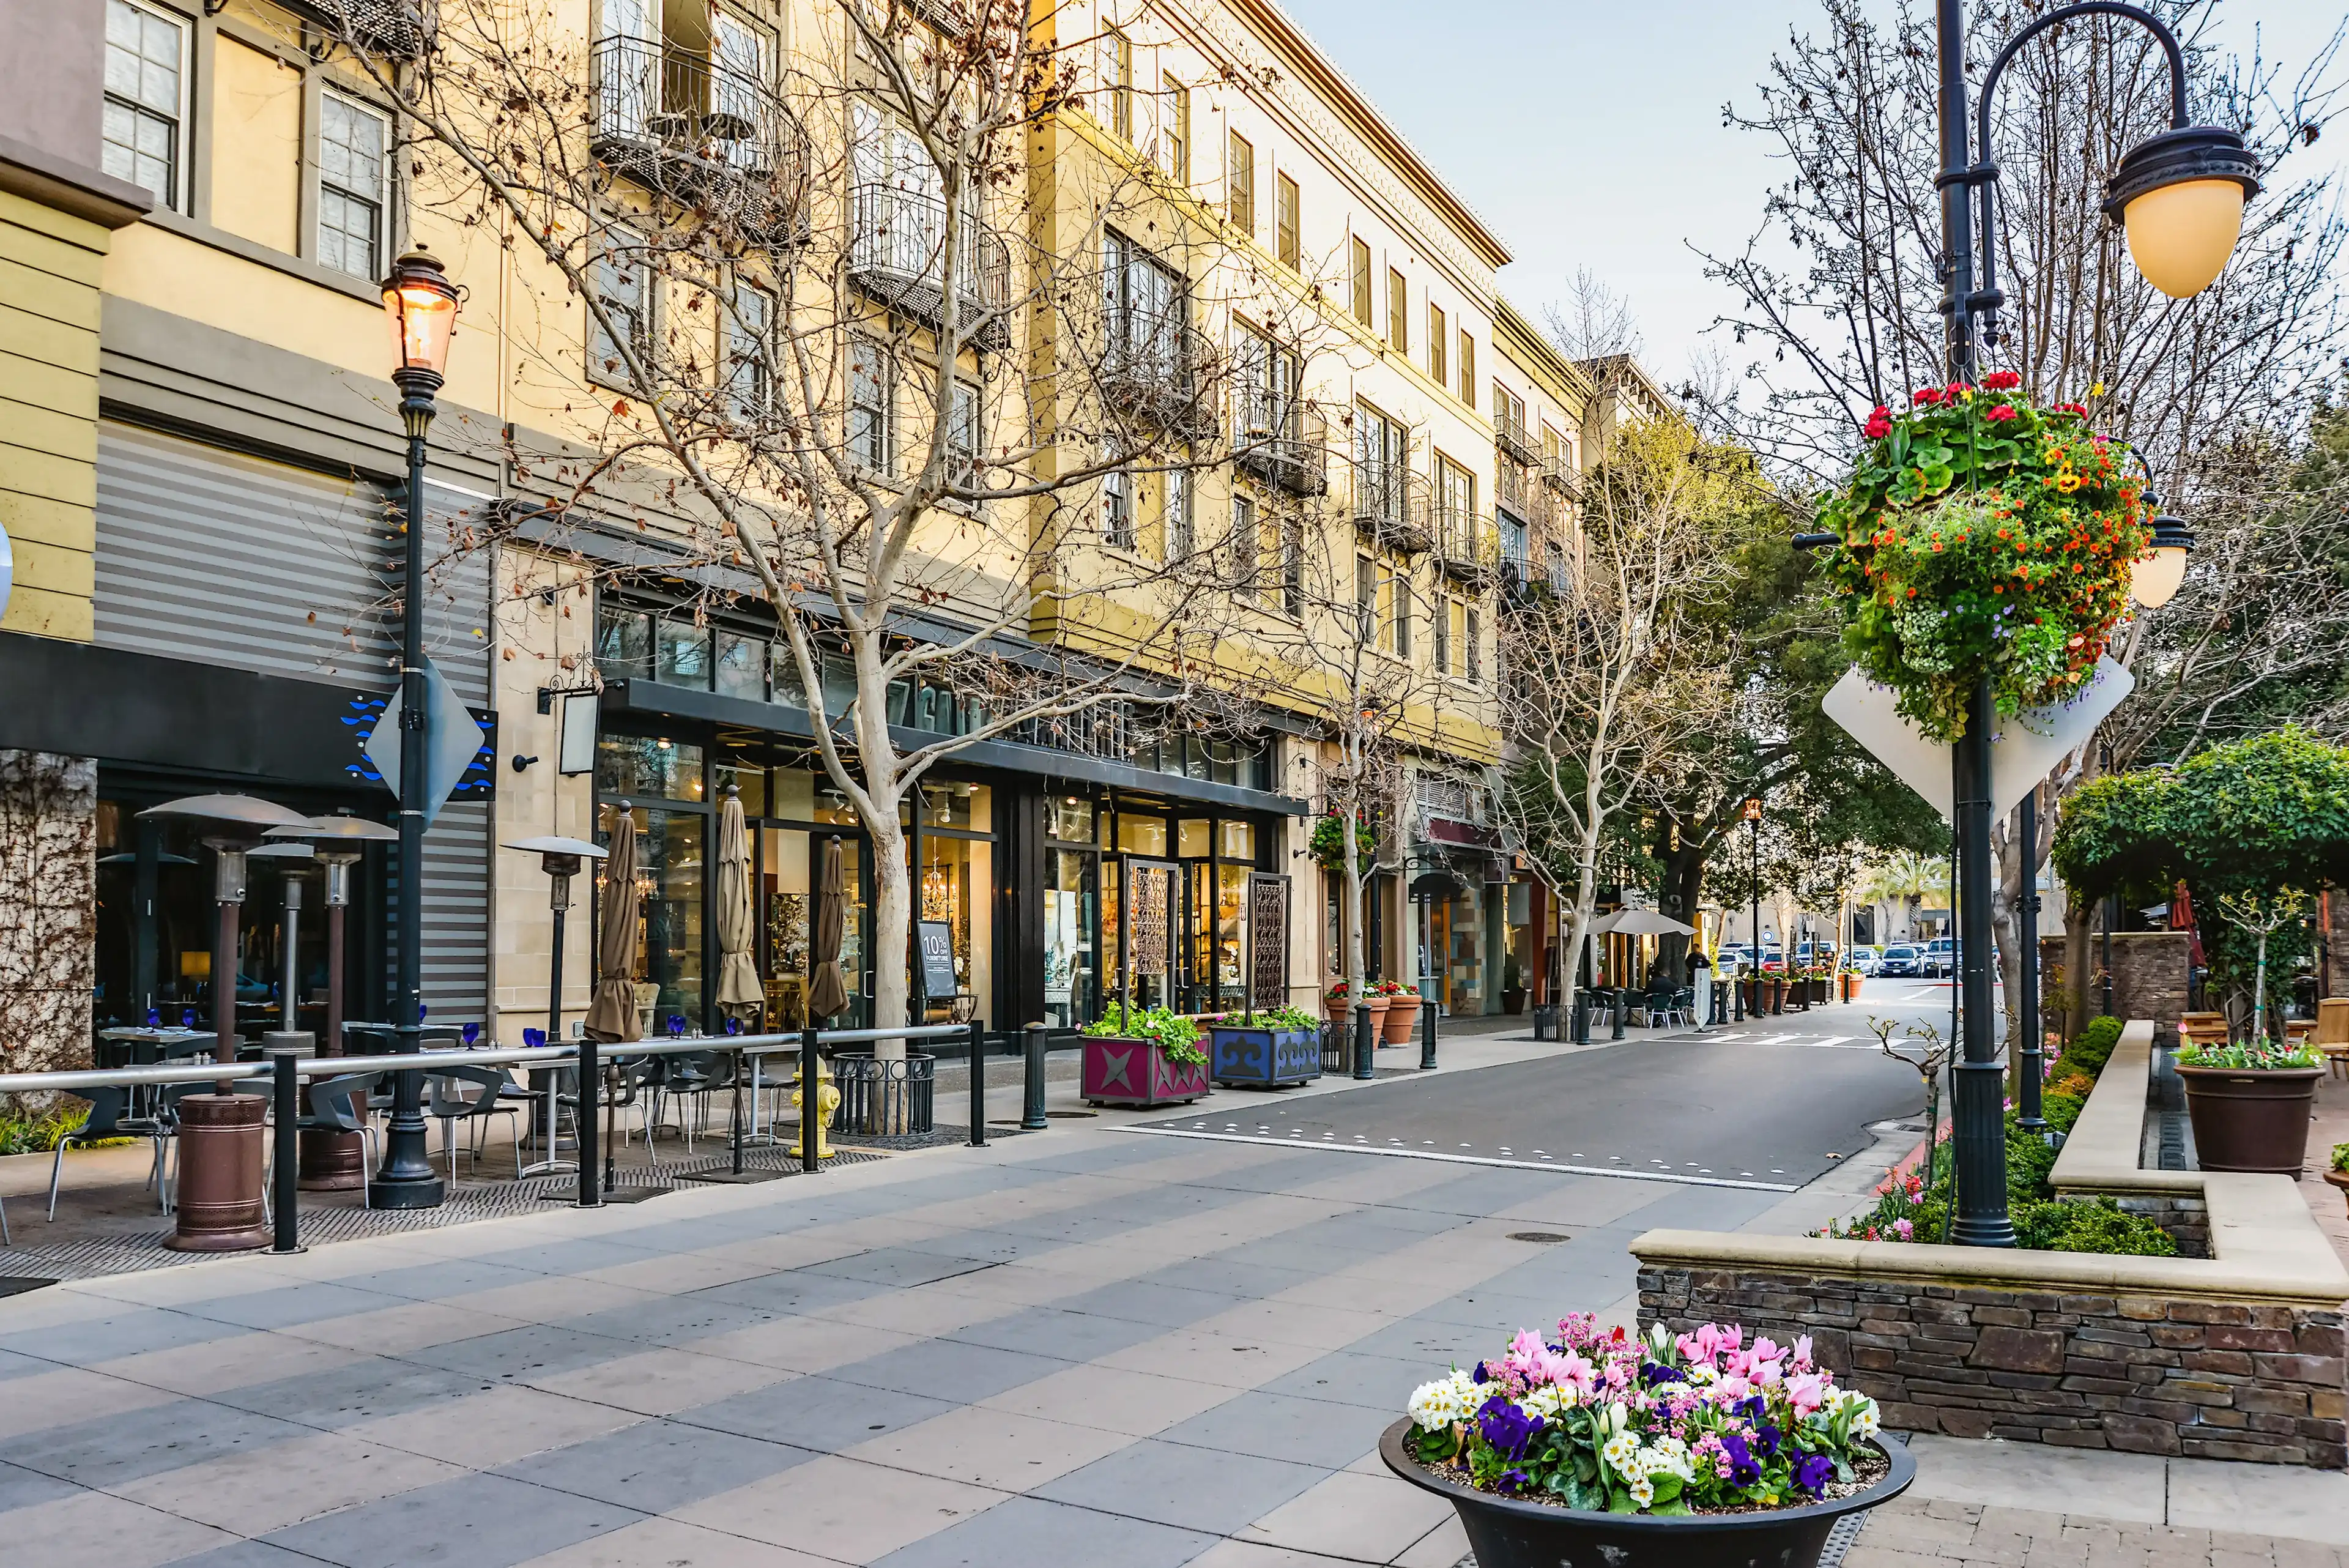 Scenery of the shopping district in San Jose, California